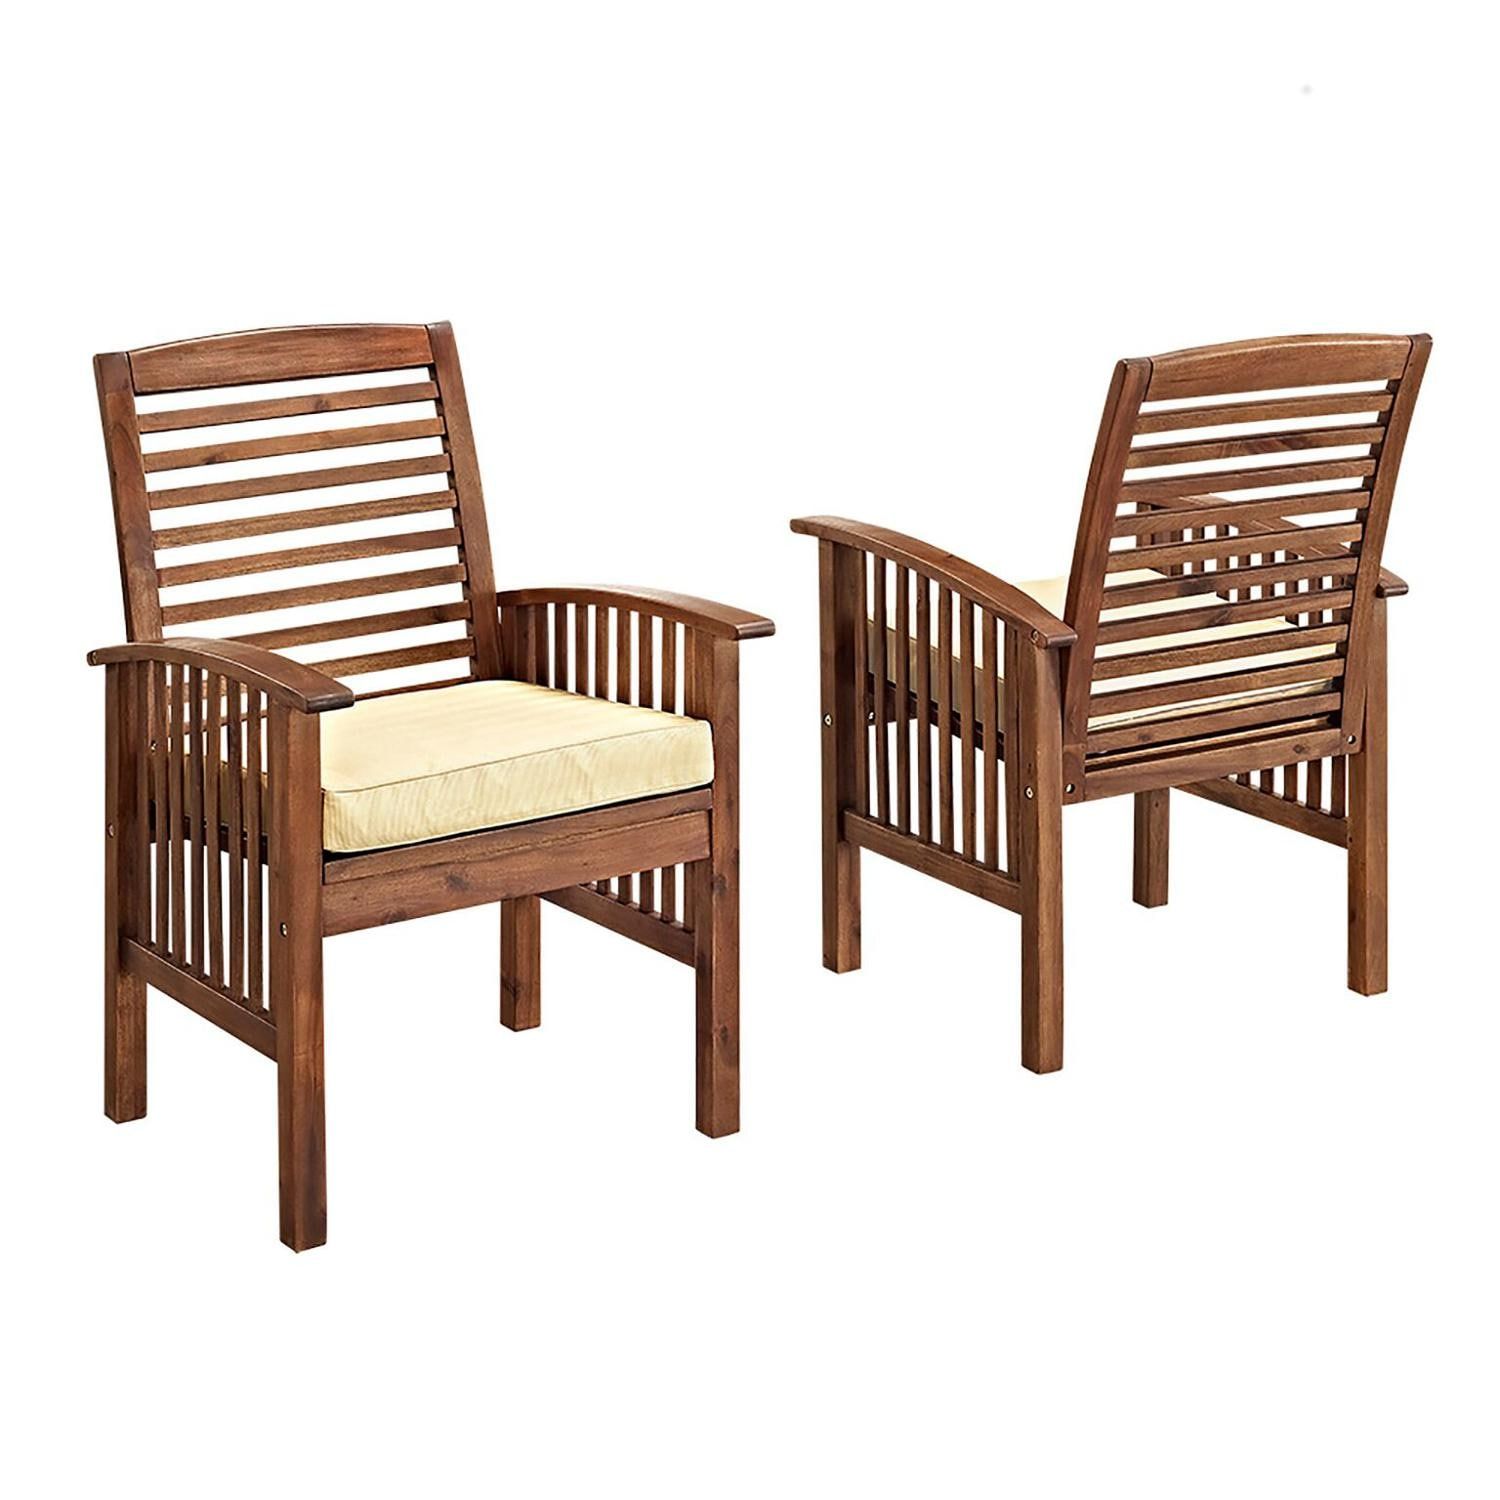 Midland 6 Piece Dark Brown Acacia Patio Dining Set W/ 55 X 35 Inch With Brown Acacia Patio Chairs With Cushions (View 3 of 15)